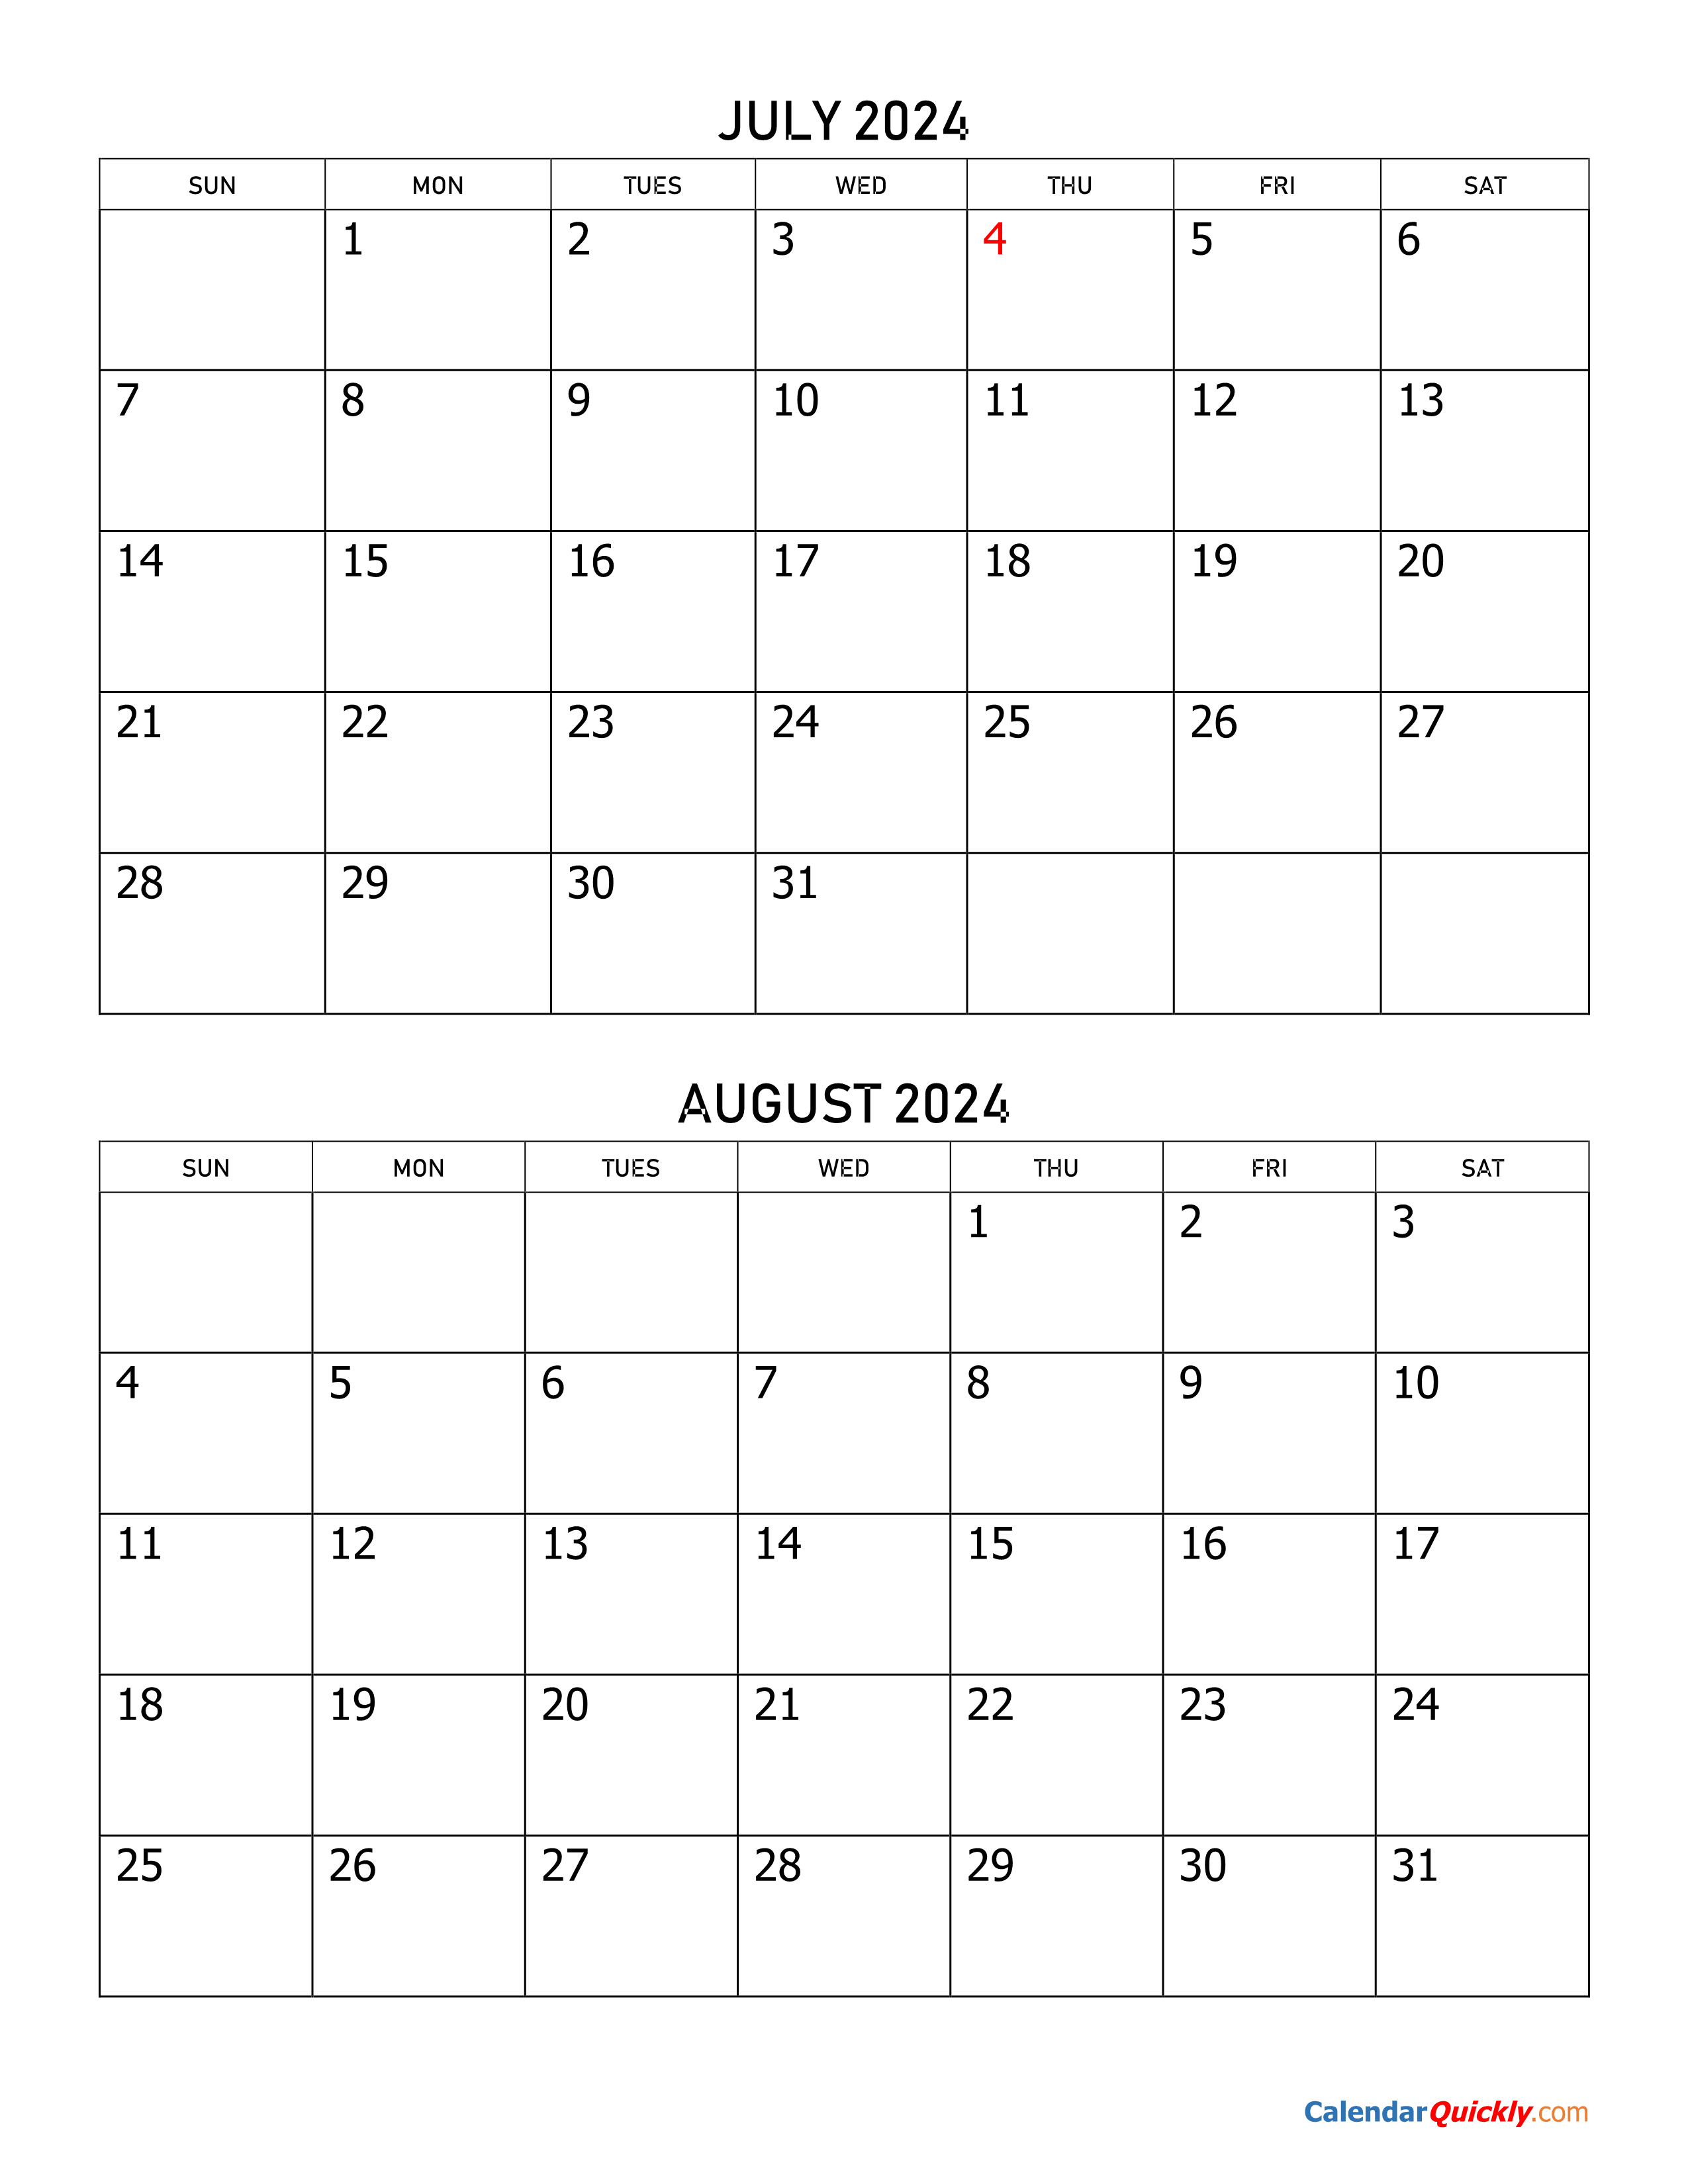 July and August 2024 Calendar | Calendar Quickly